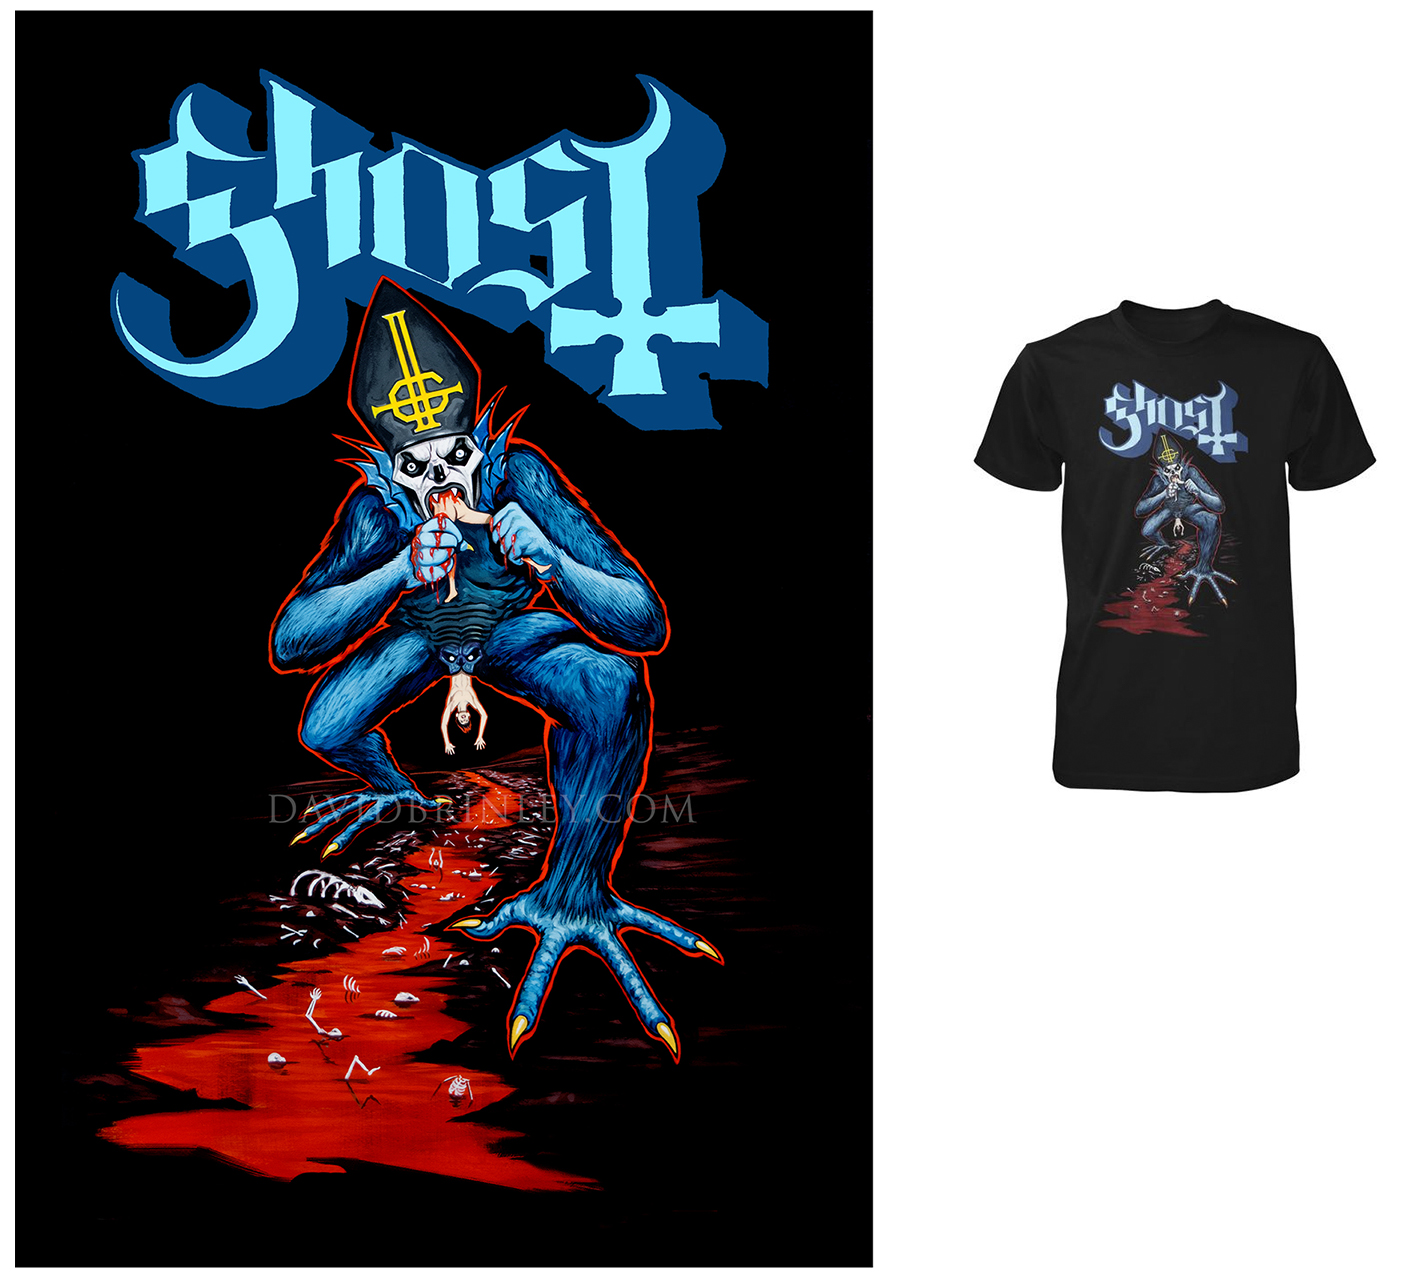   GHOST | The Devourer   Acrylic on paper and digital  Official Ghost exclusive T-shirt | 2017 